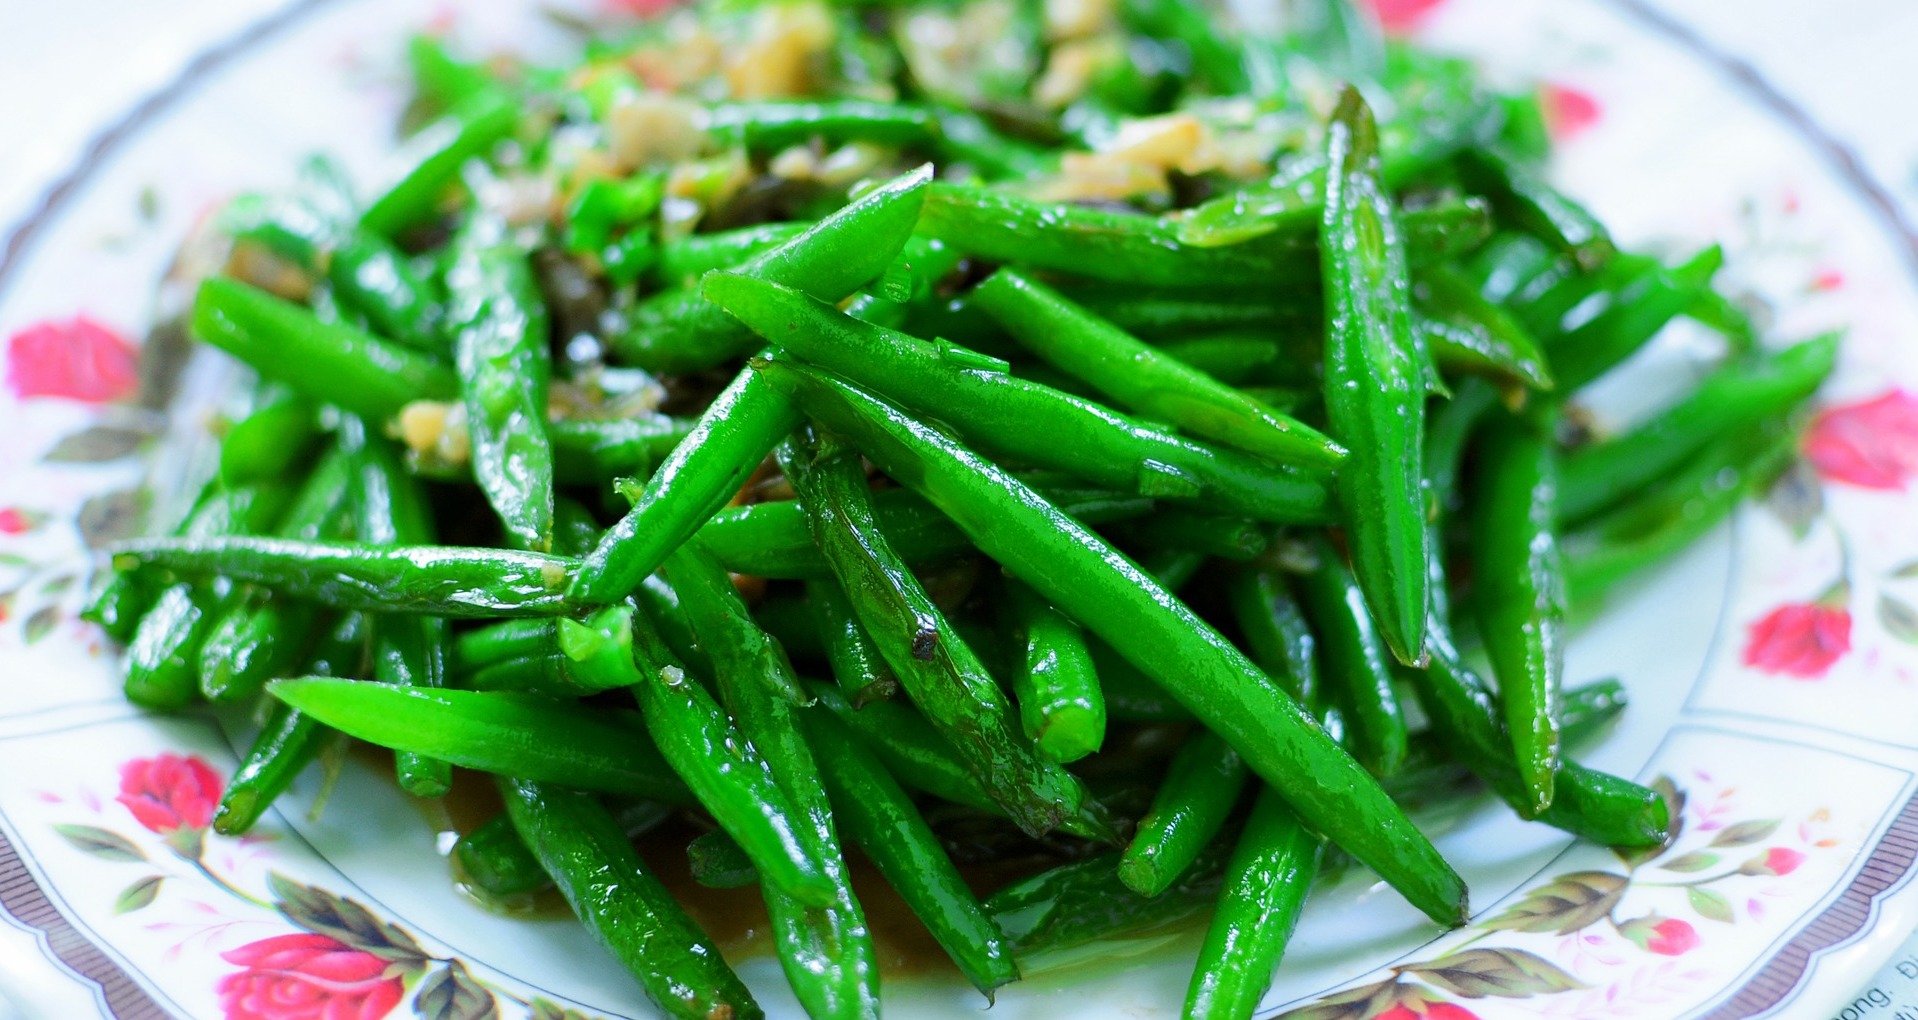 Recipes with Green Beans